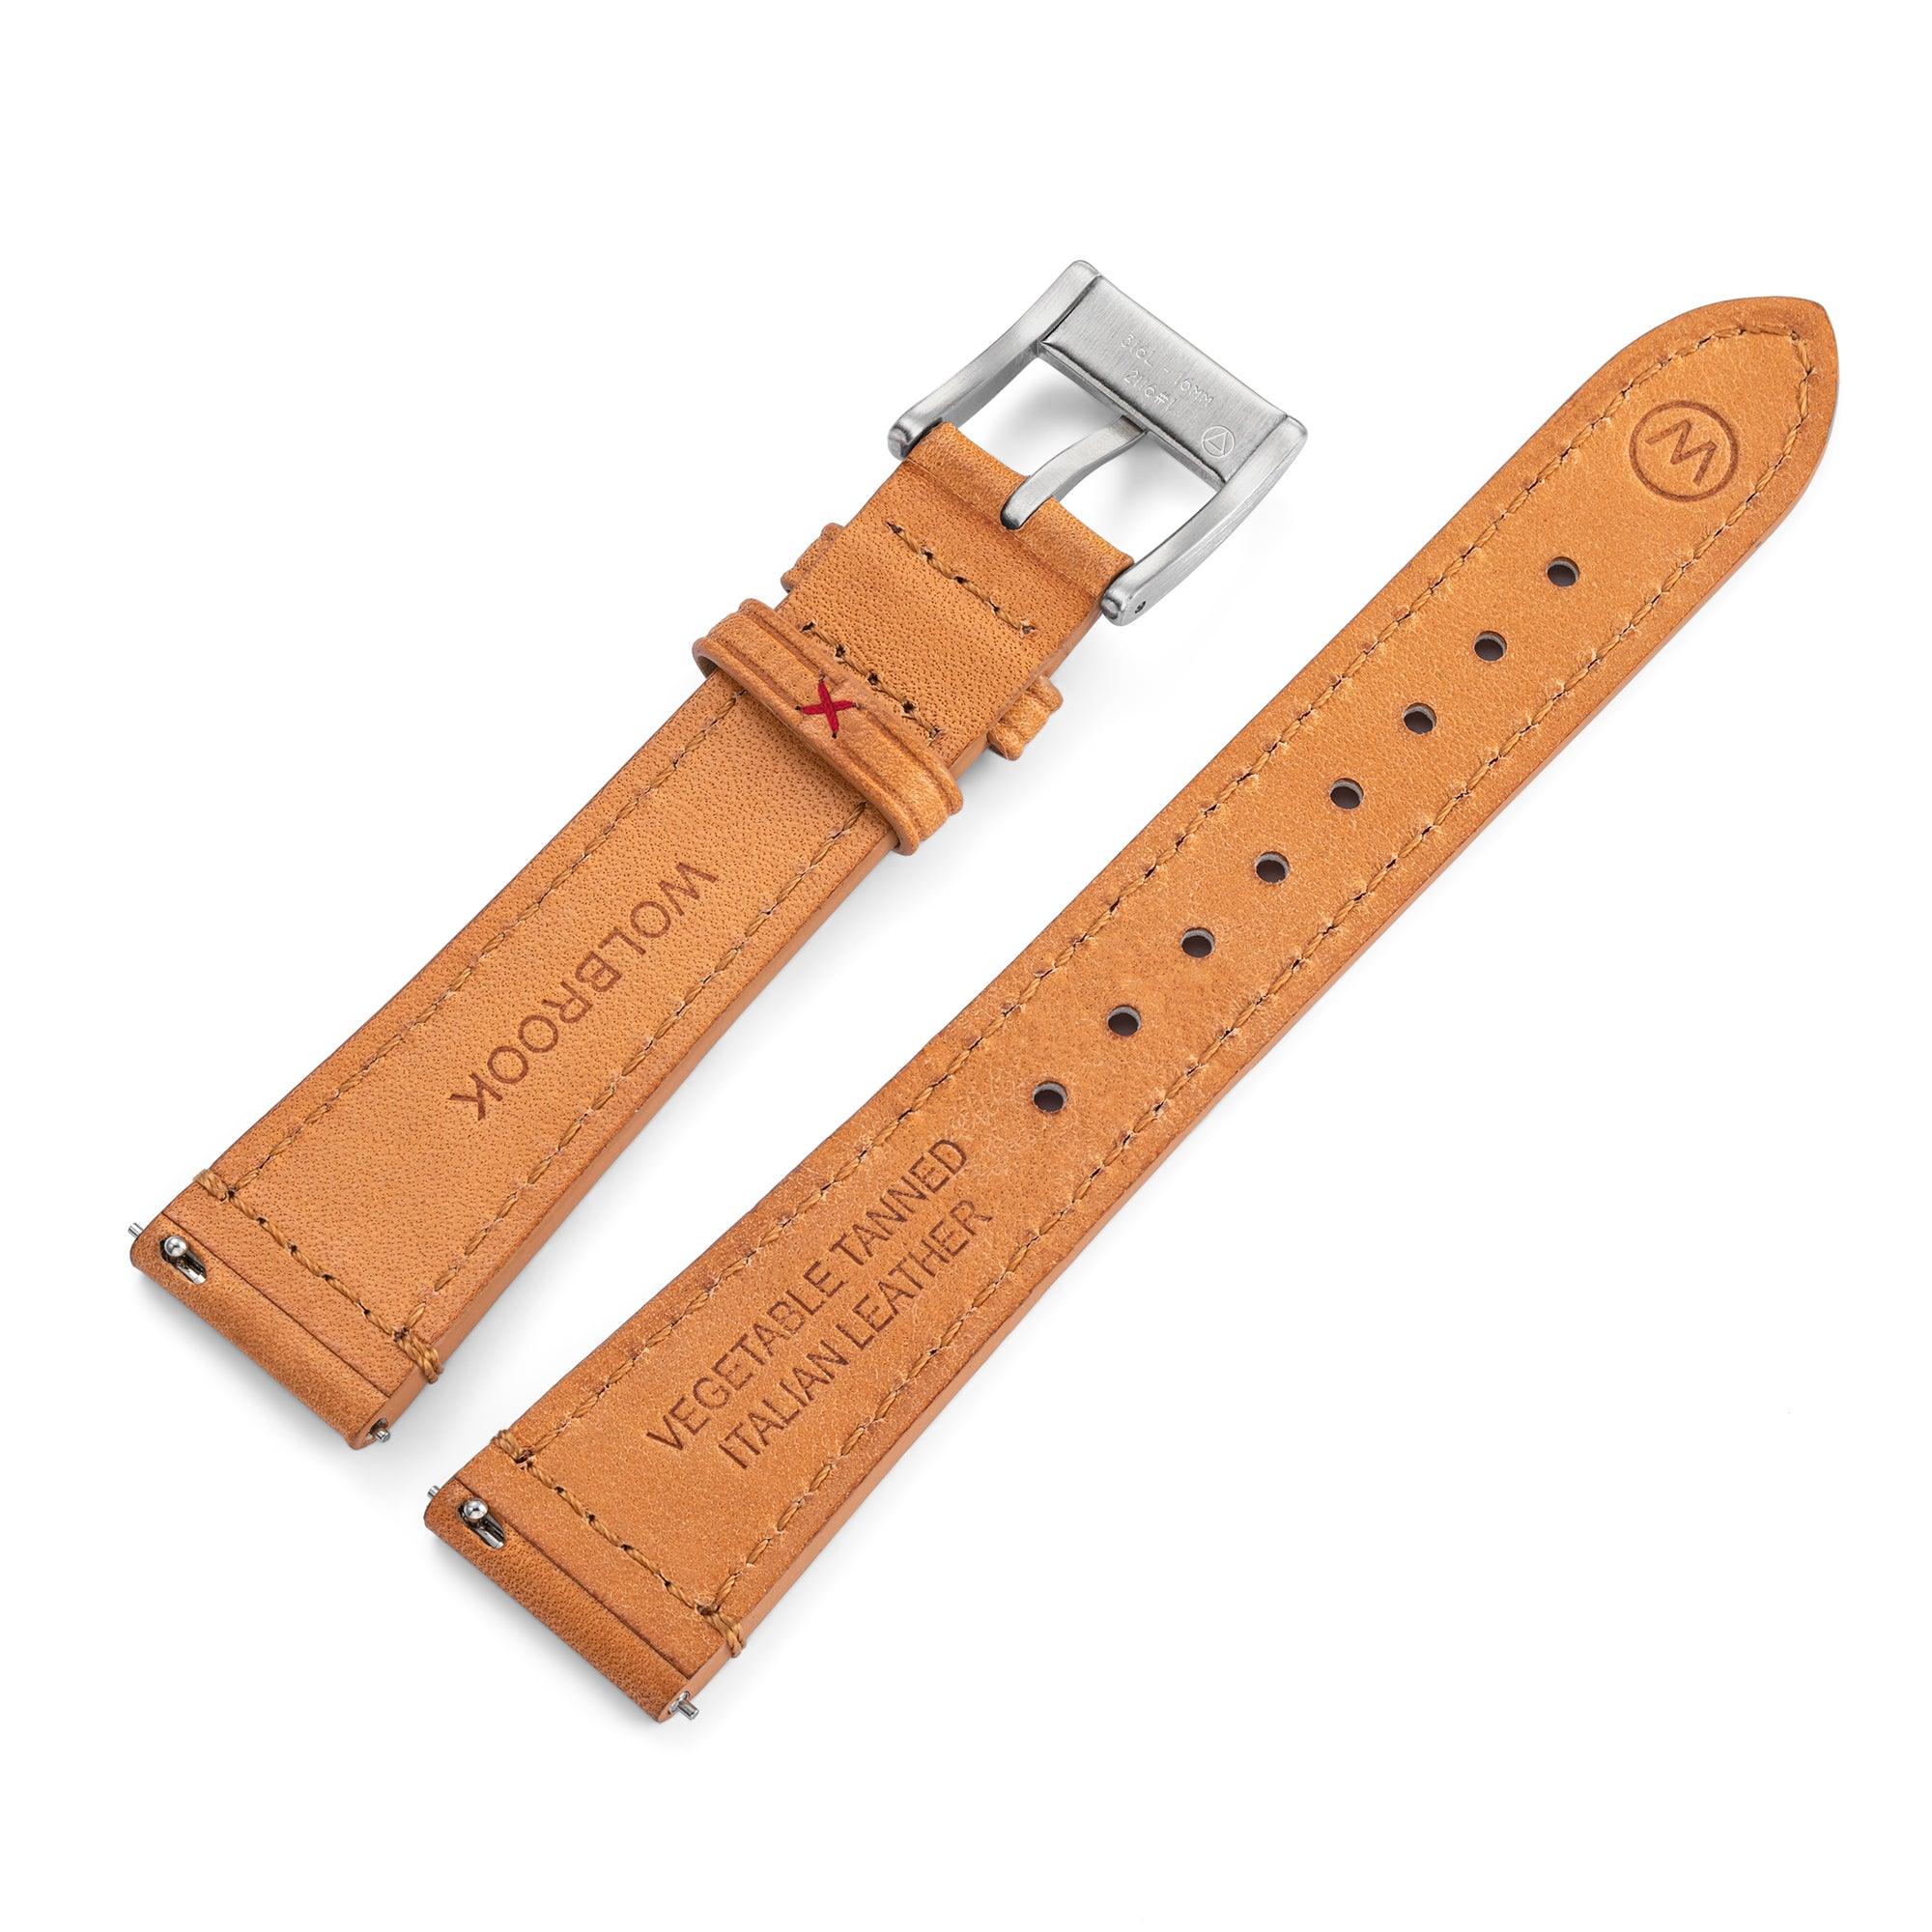 20mm 22mm 24mm Vegetable Tanned, Leather Panerai Strap, Band,Leather Watch  Band, Watch Straps, Vintage Strap – Coffee Brown - PRIMRIA Watch Bands &  Straps